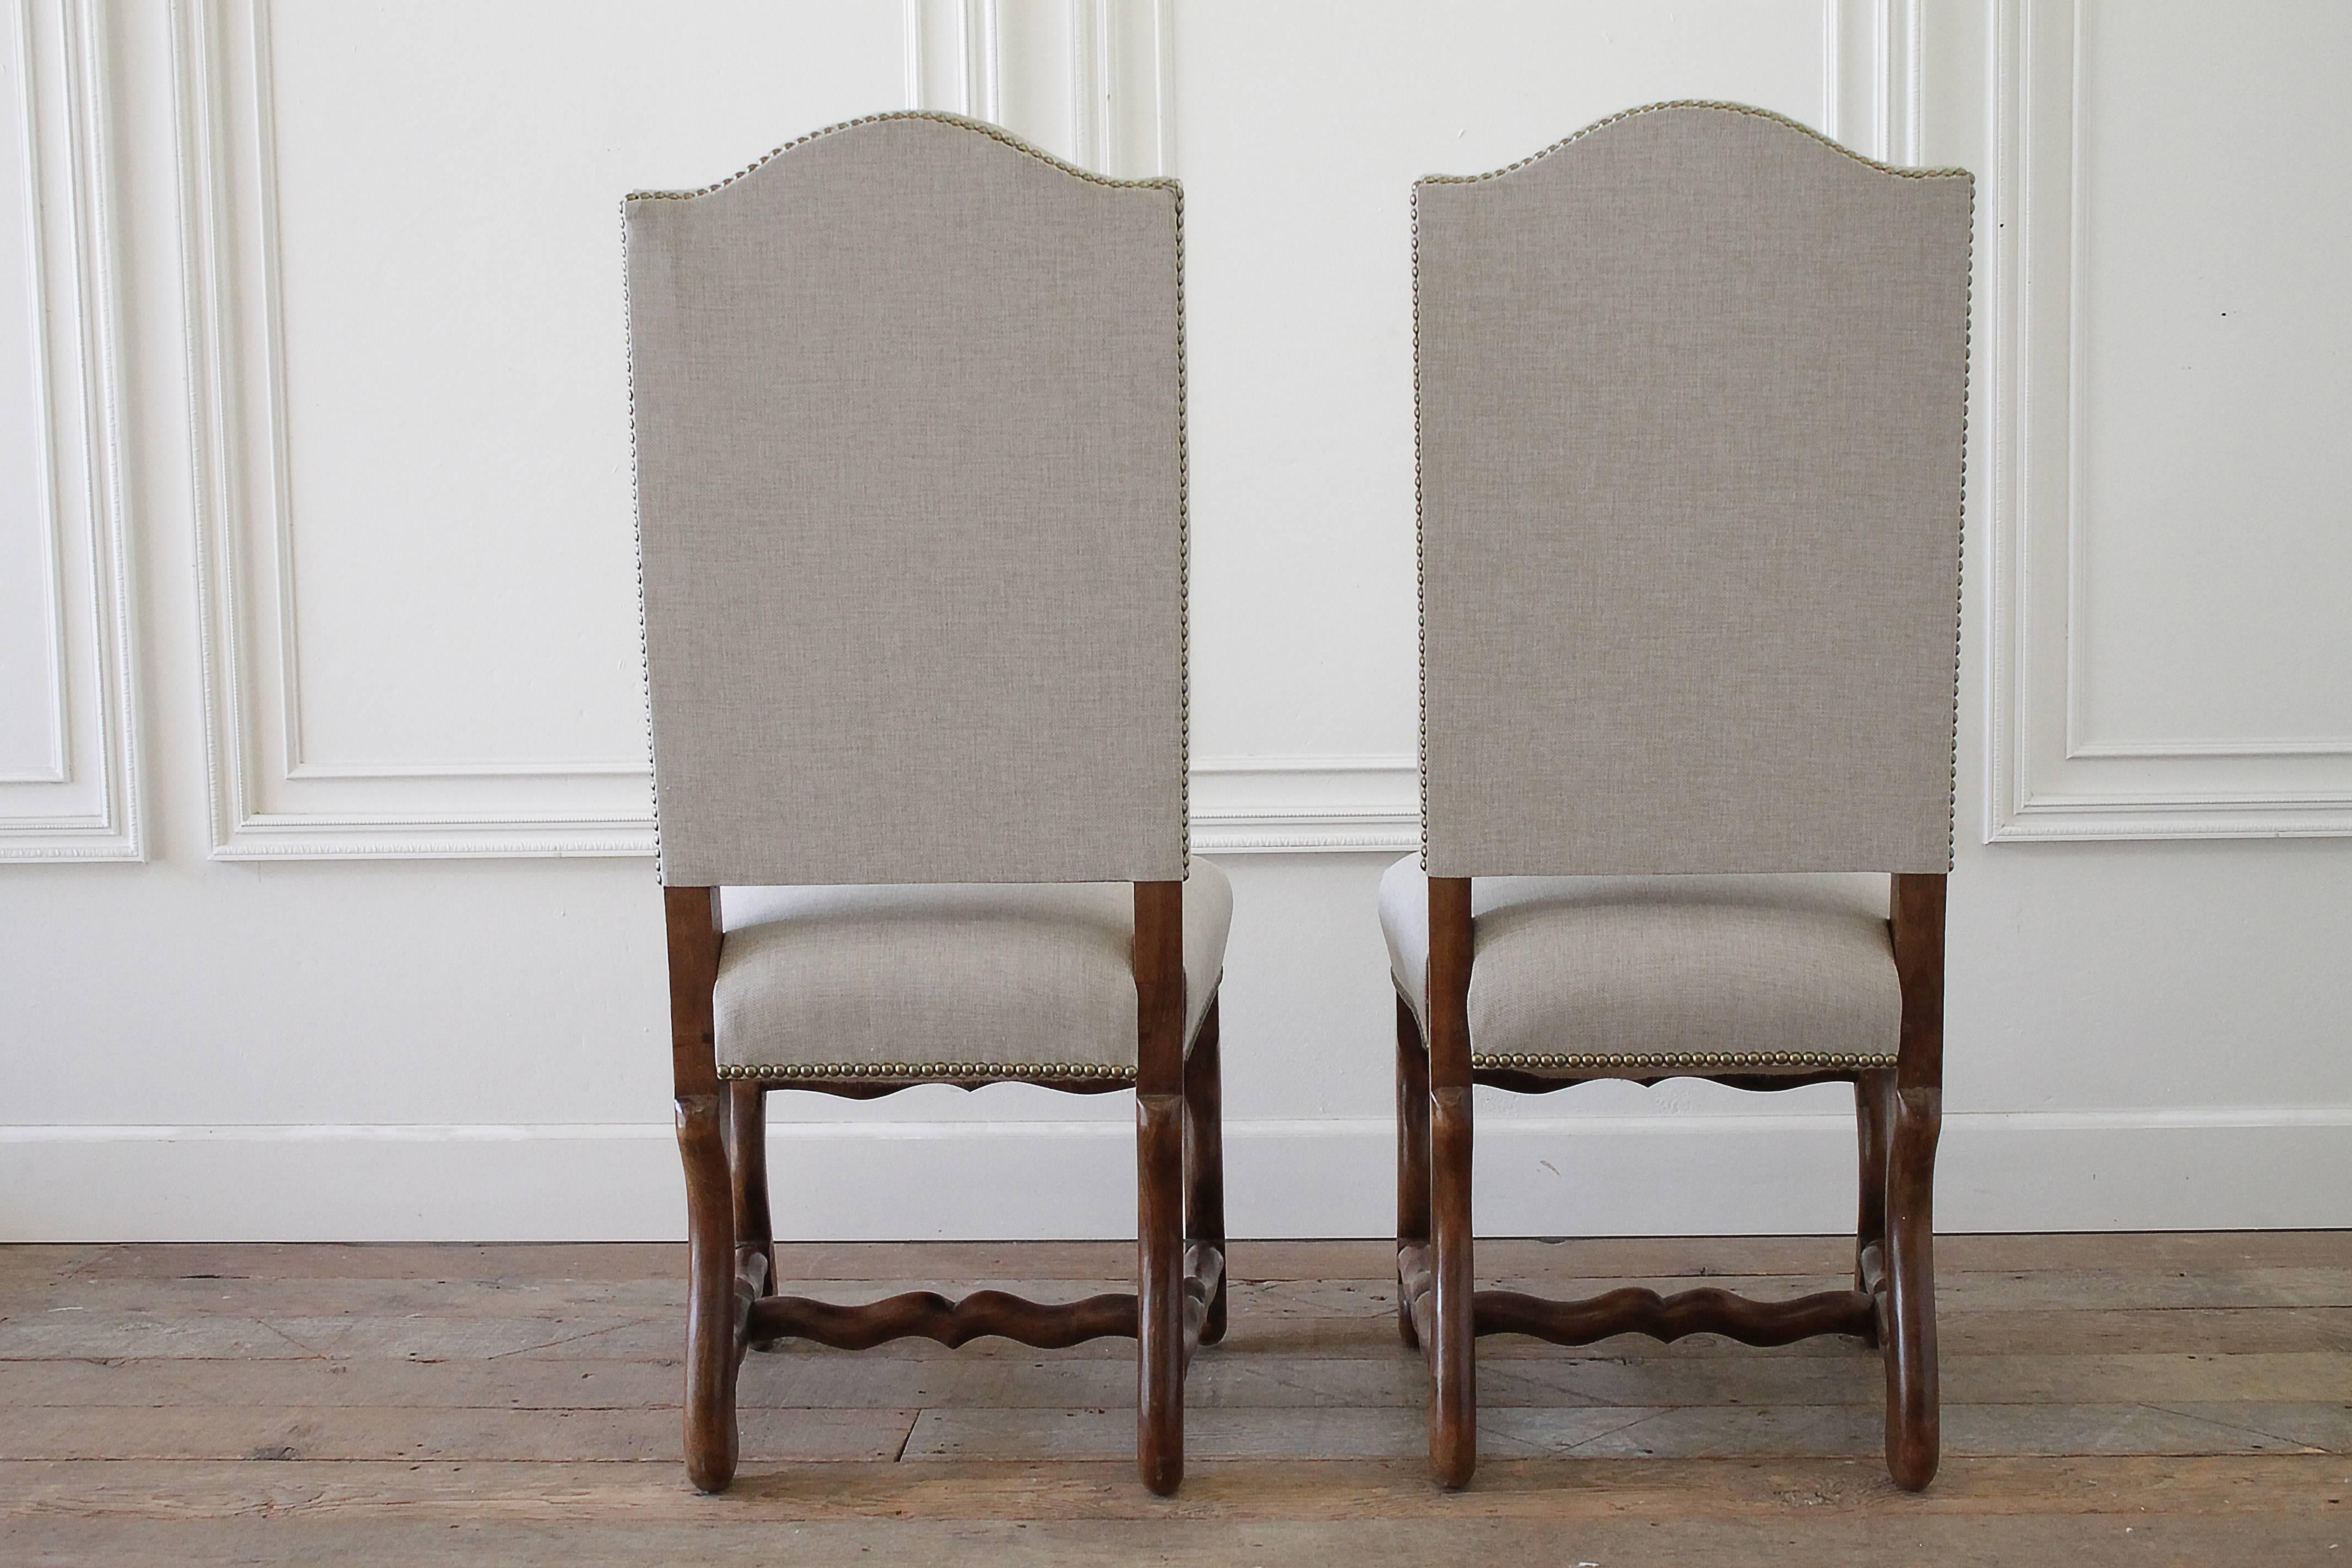 Cotton Set of Four Antique Renaissance Style Dining Chairs in Natural Linen